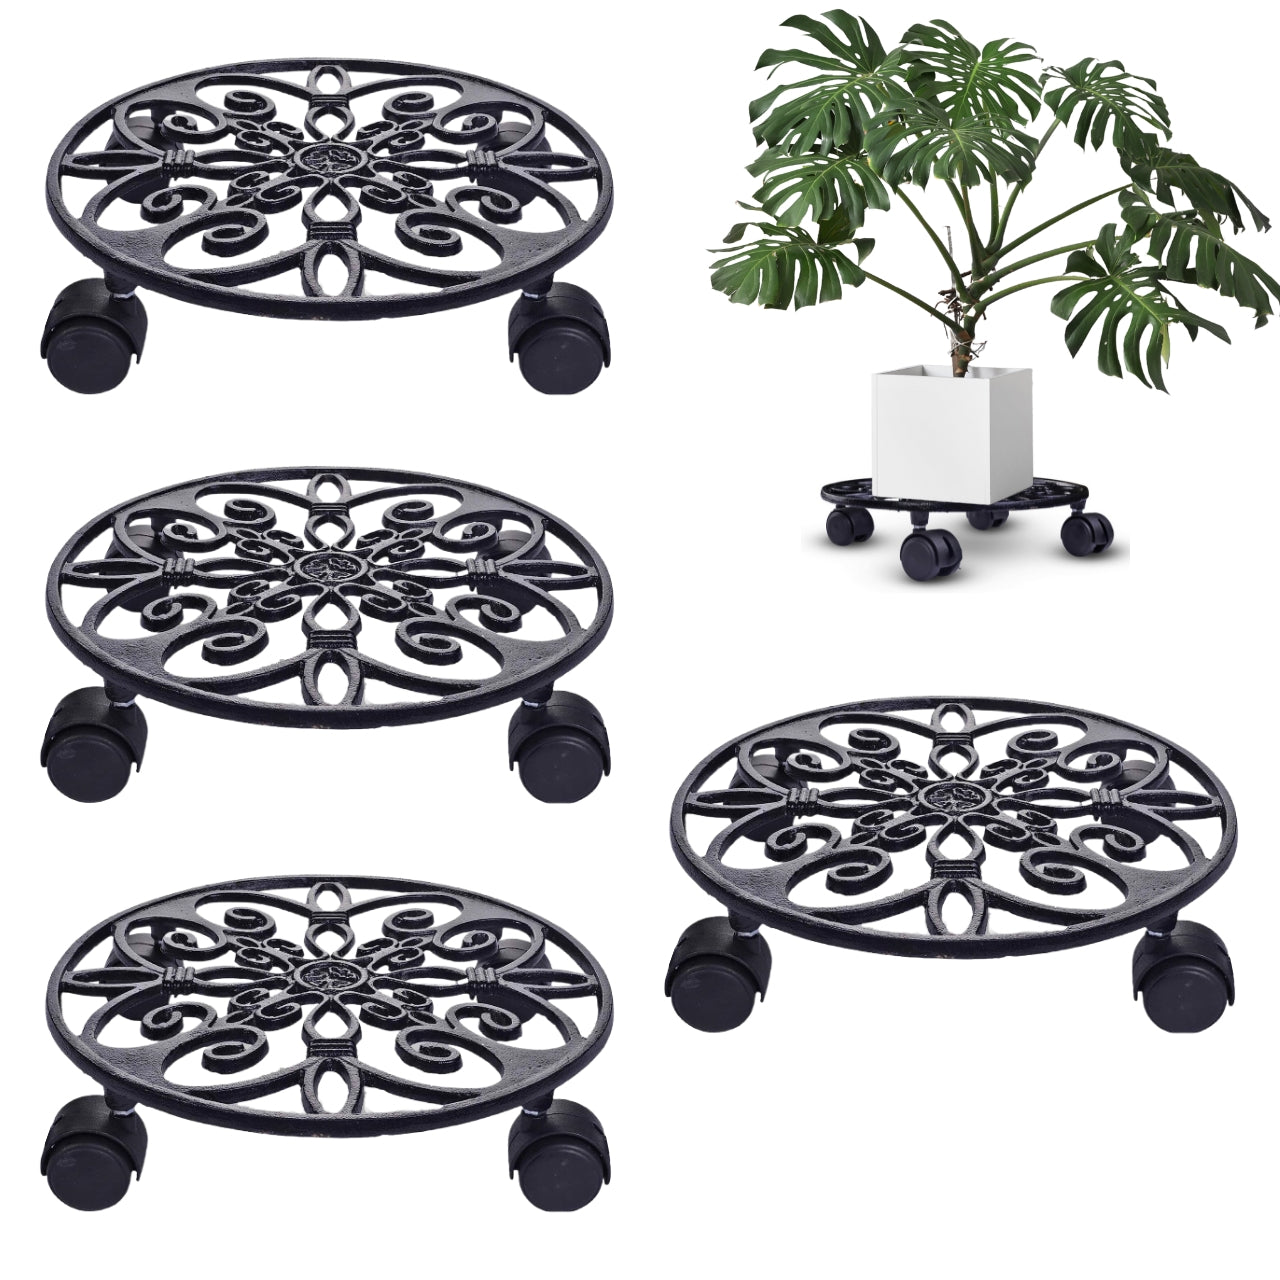 SpinX Metal Plant Stand